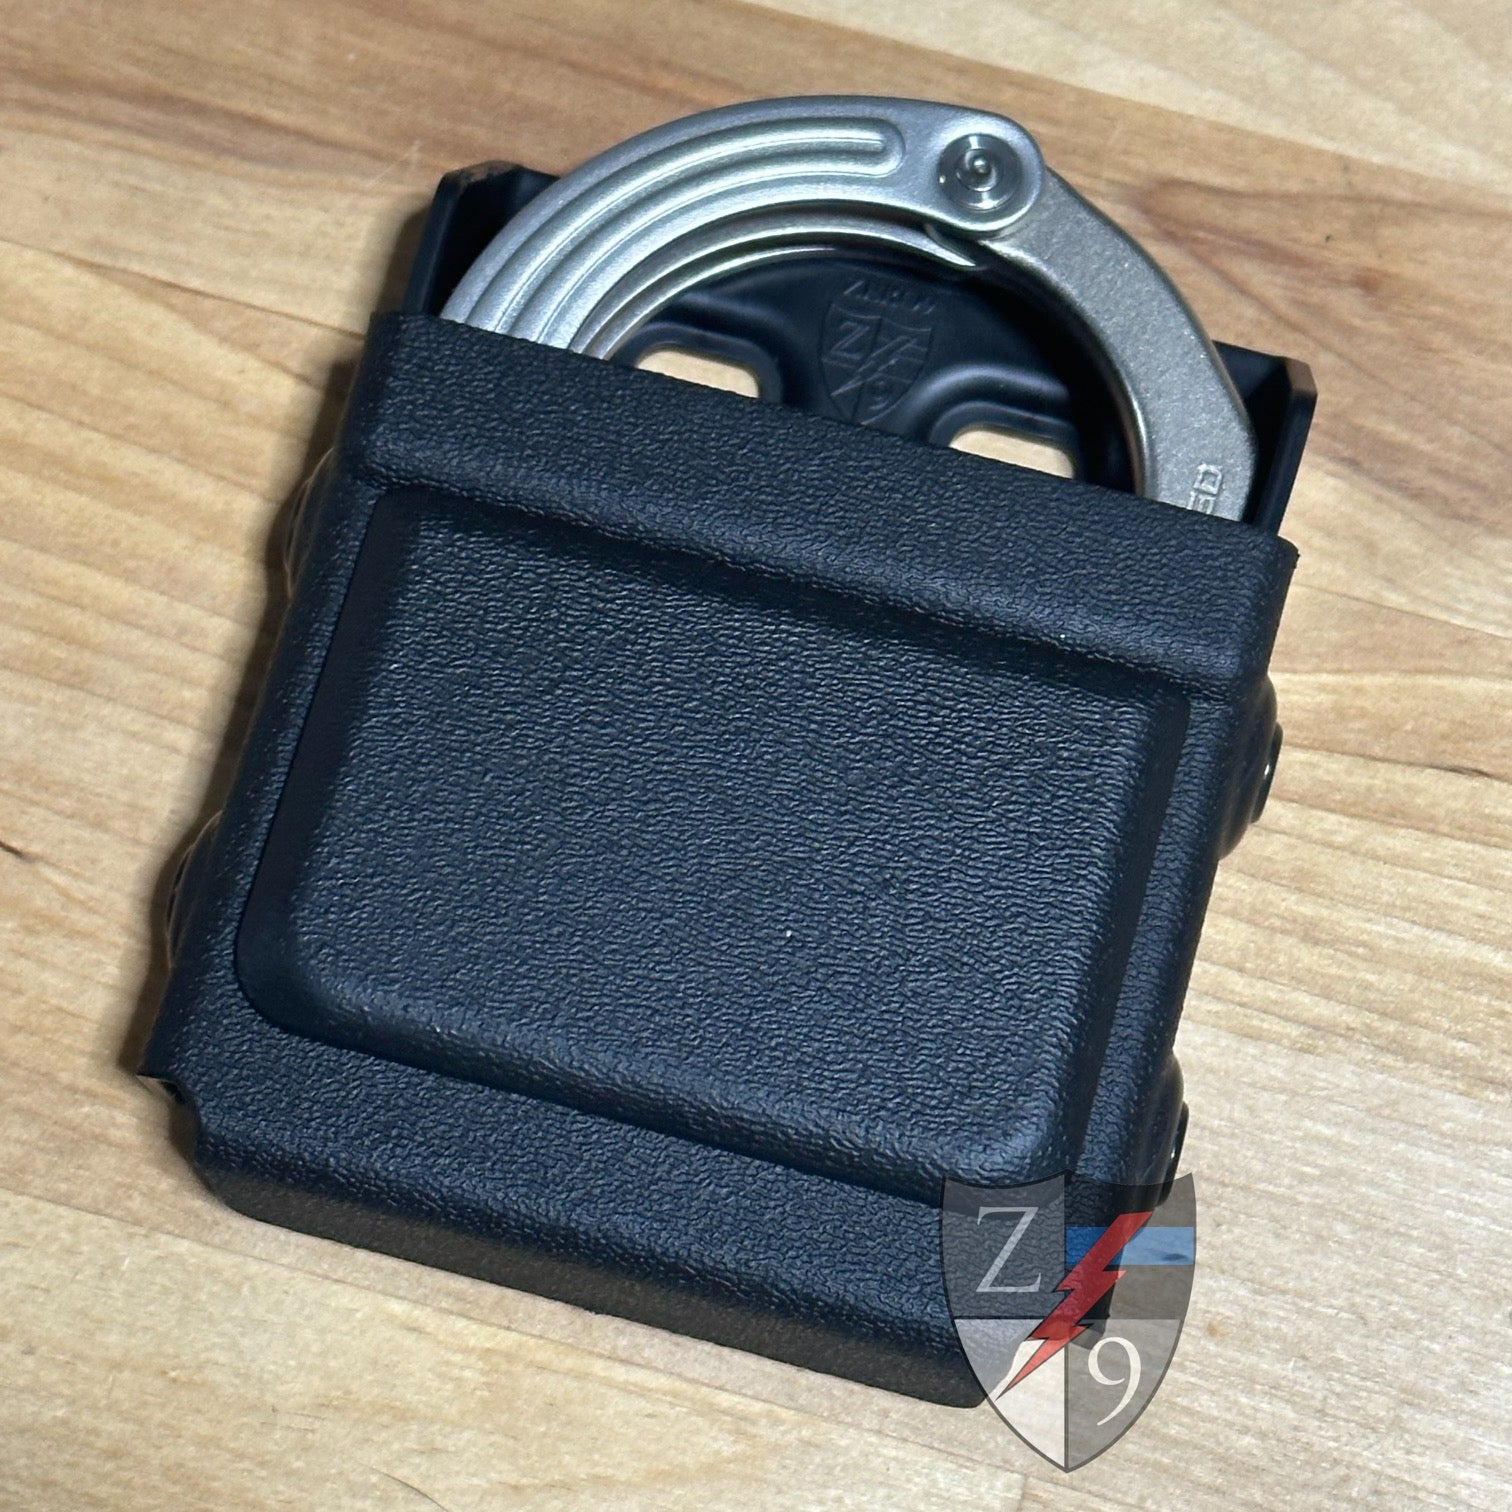 Cases for the new ASP Sentry Cuffs and the release of our Cuff Case Fillers